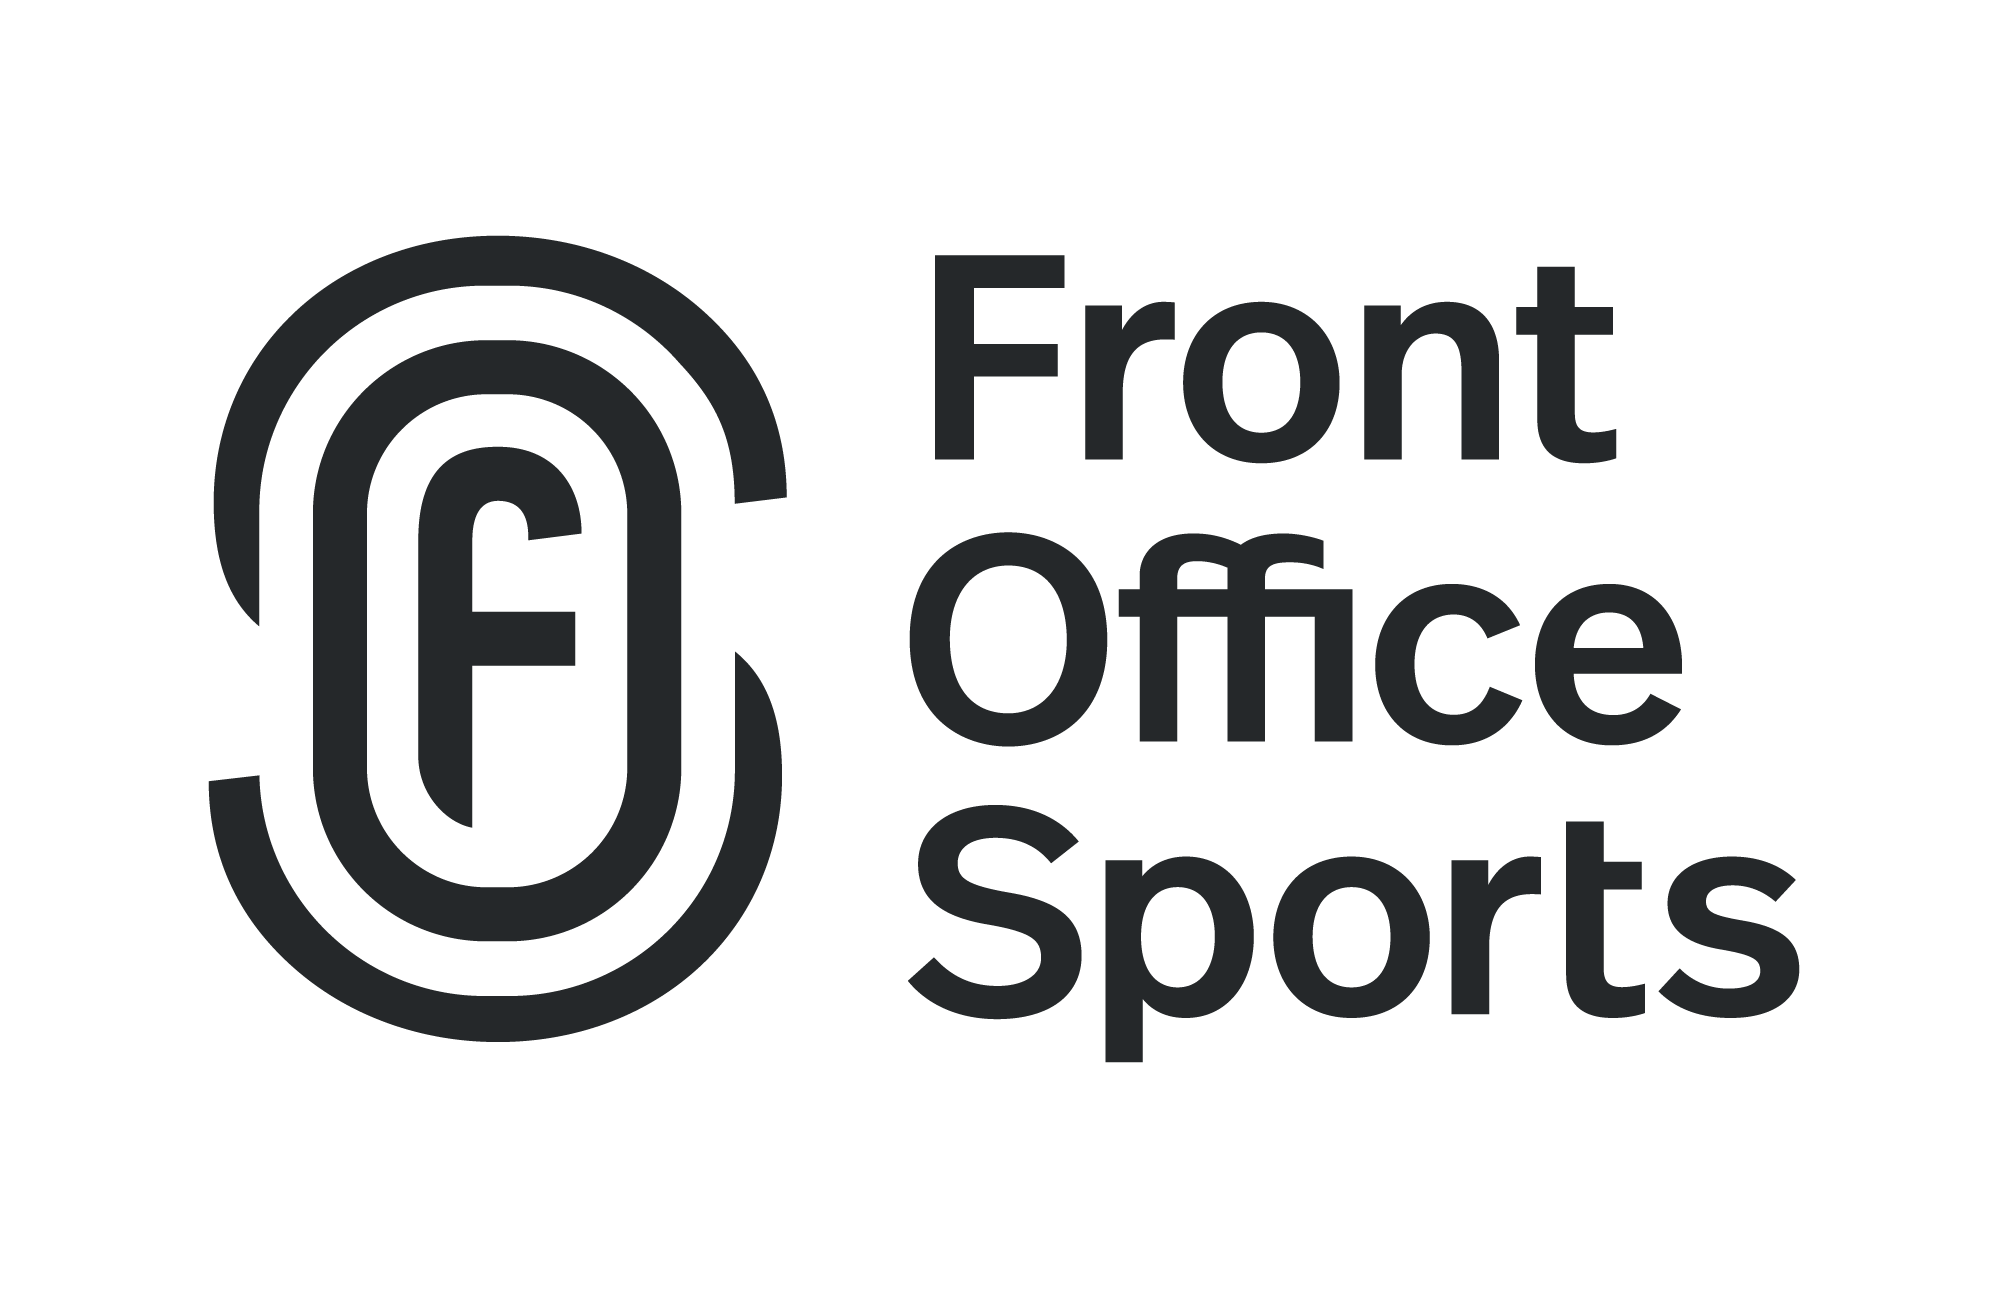 Front Office Sports Is Looking To Hire A Managing Editor For NY Office